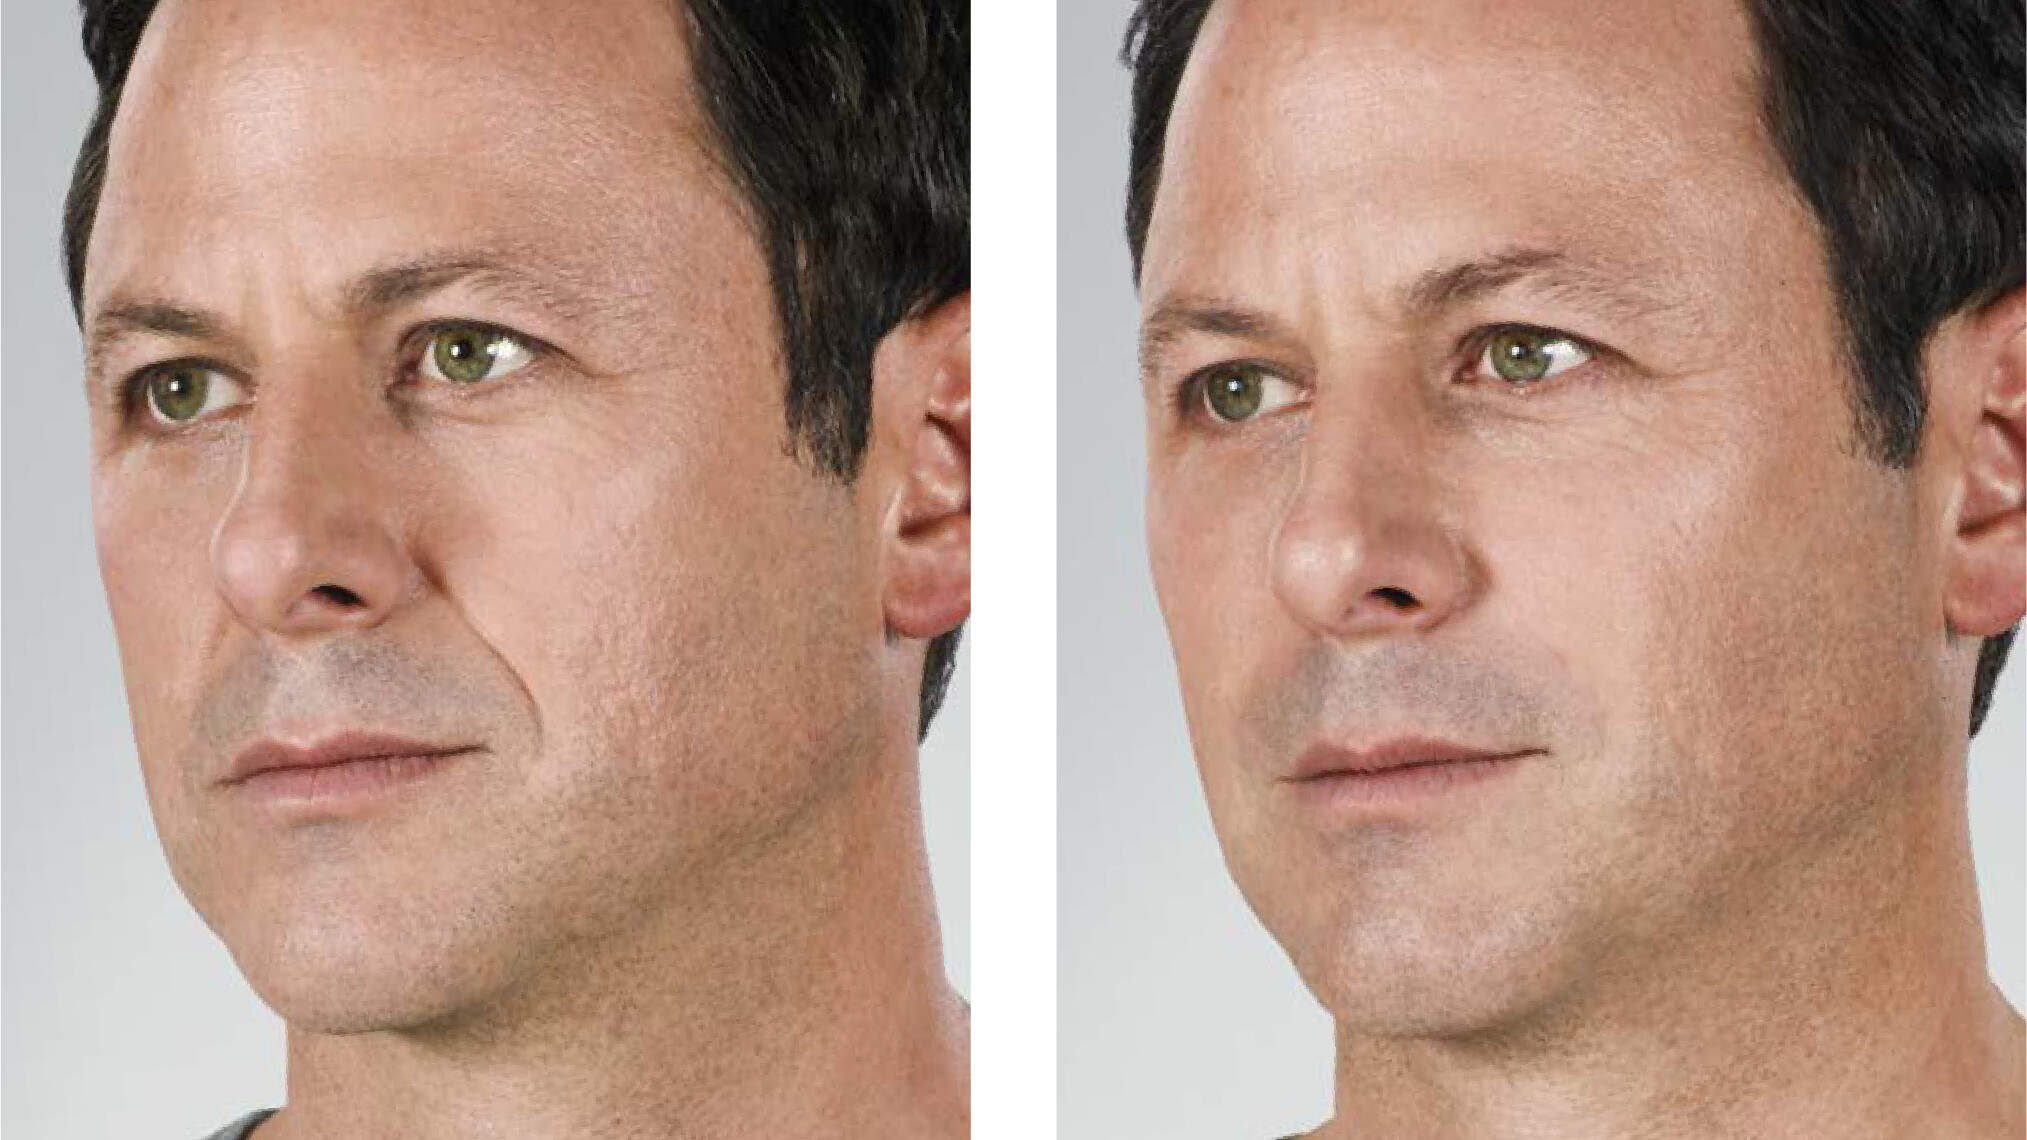 Before and after photos of a man's face after getting facial treatments at Surgical Dermatology Group